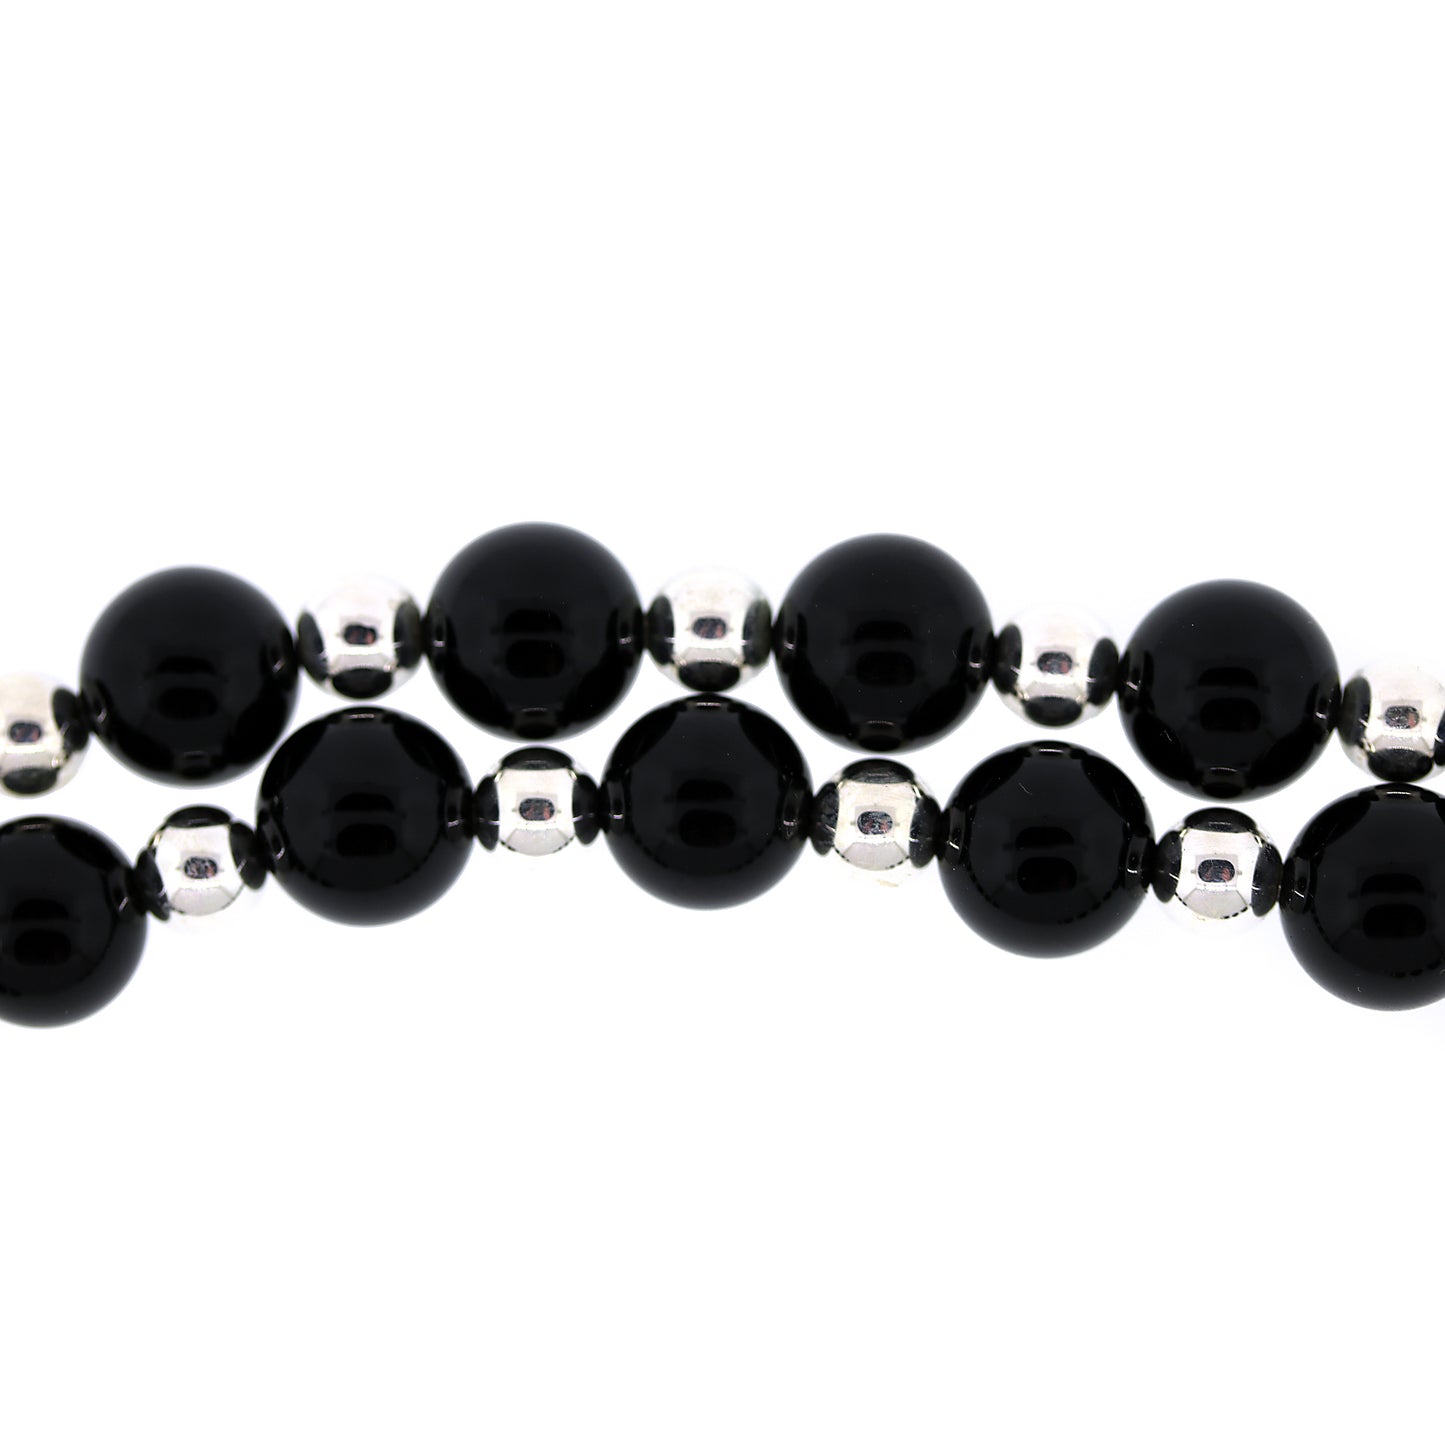 Onyx Beads in Sterling Silver Long Necklace